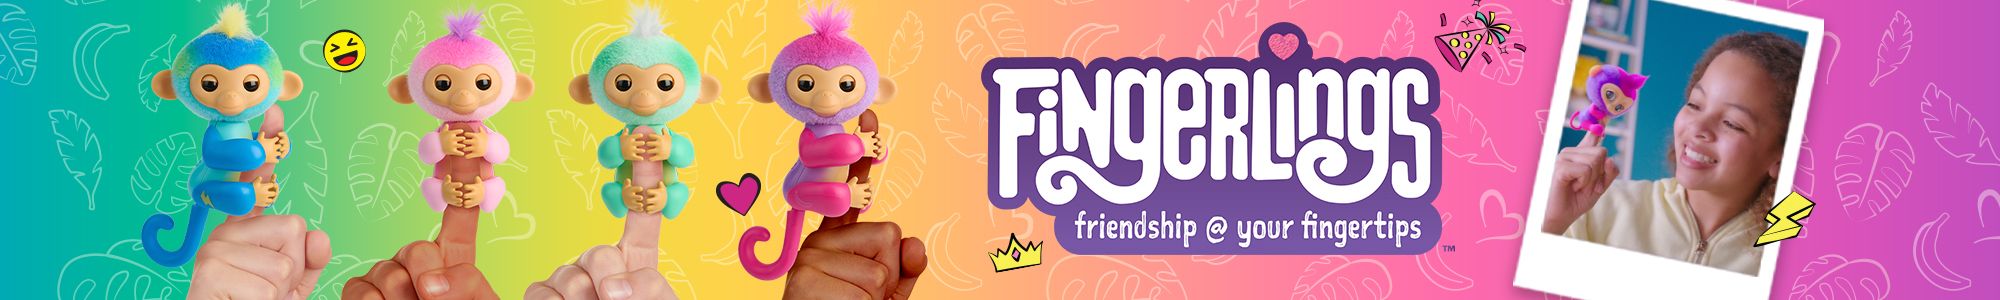 Entertainer-Landing-Page-Banners-x3Fingerlings-landing-page-banner-1400x300px-.png